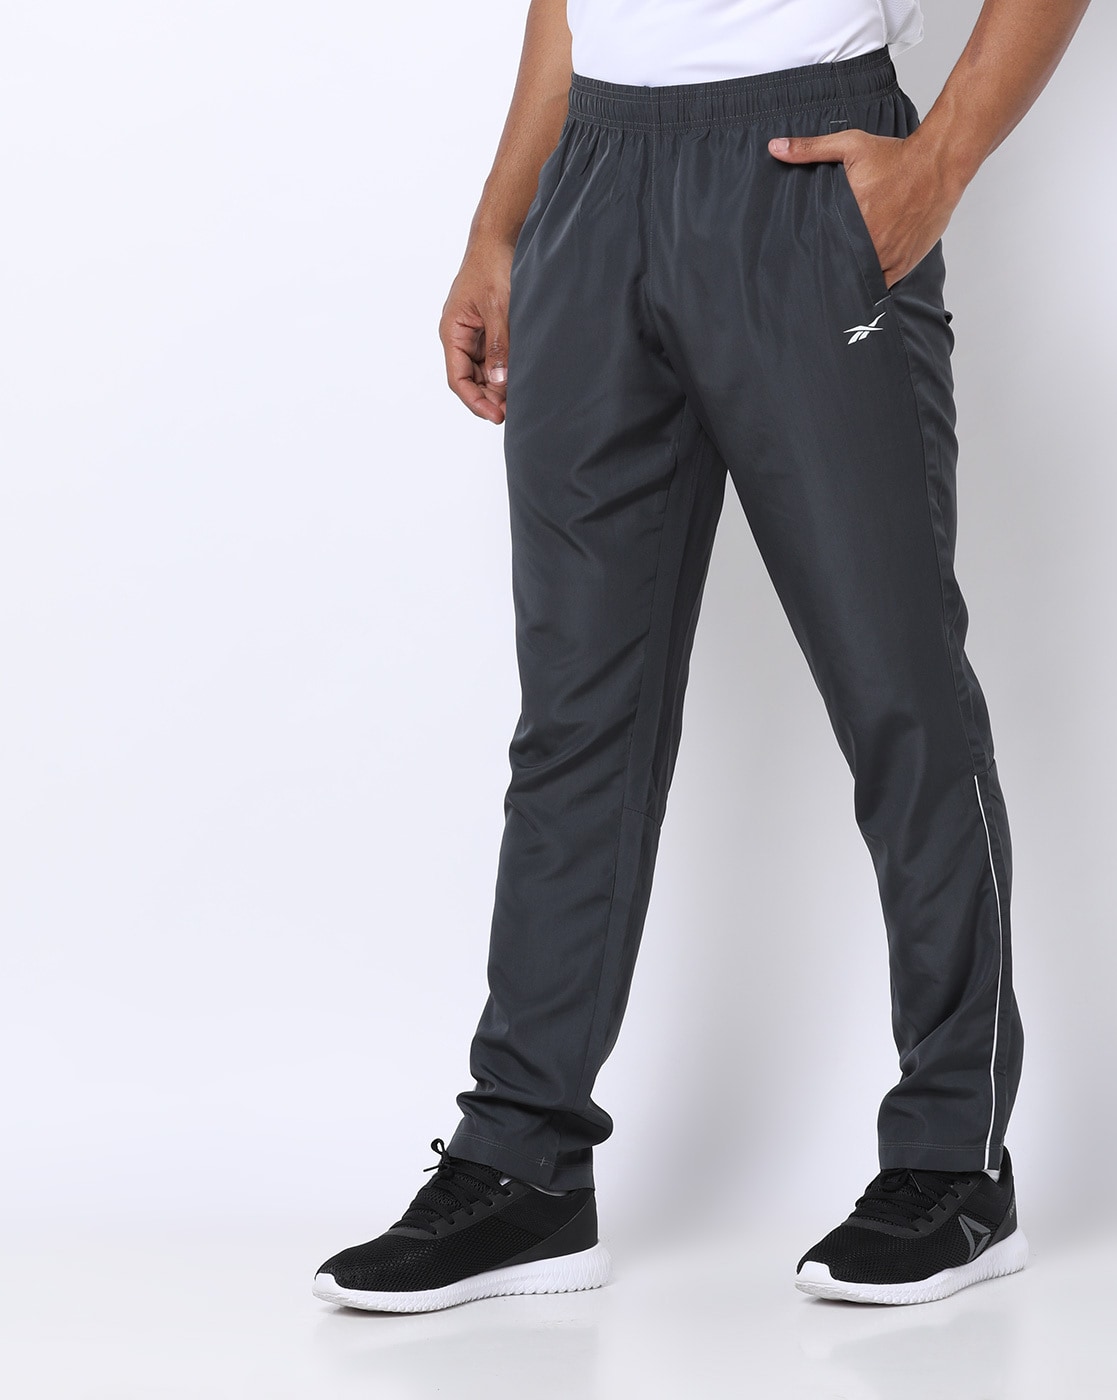 Reebok Womens Training Essentials Track Pants Buy Reebok Womens Training  Essentials Track Pants Online at Best Price in India  Nykaa